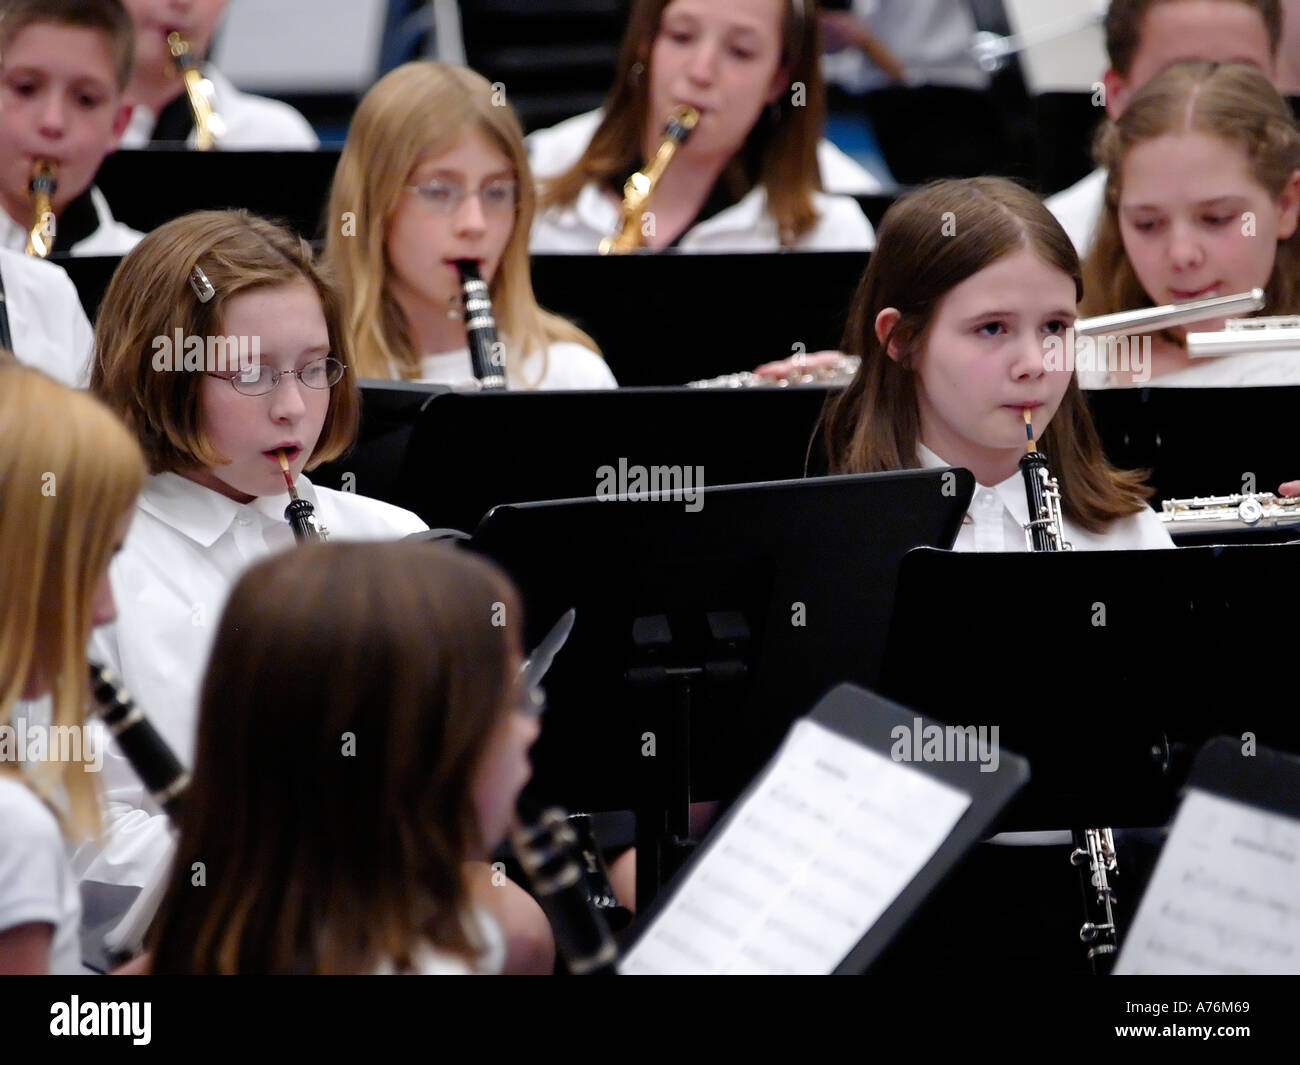 Two student oboists in concert performance surrounded by fellow band members Stock Photo